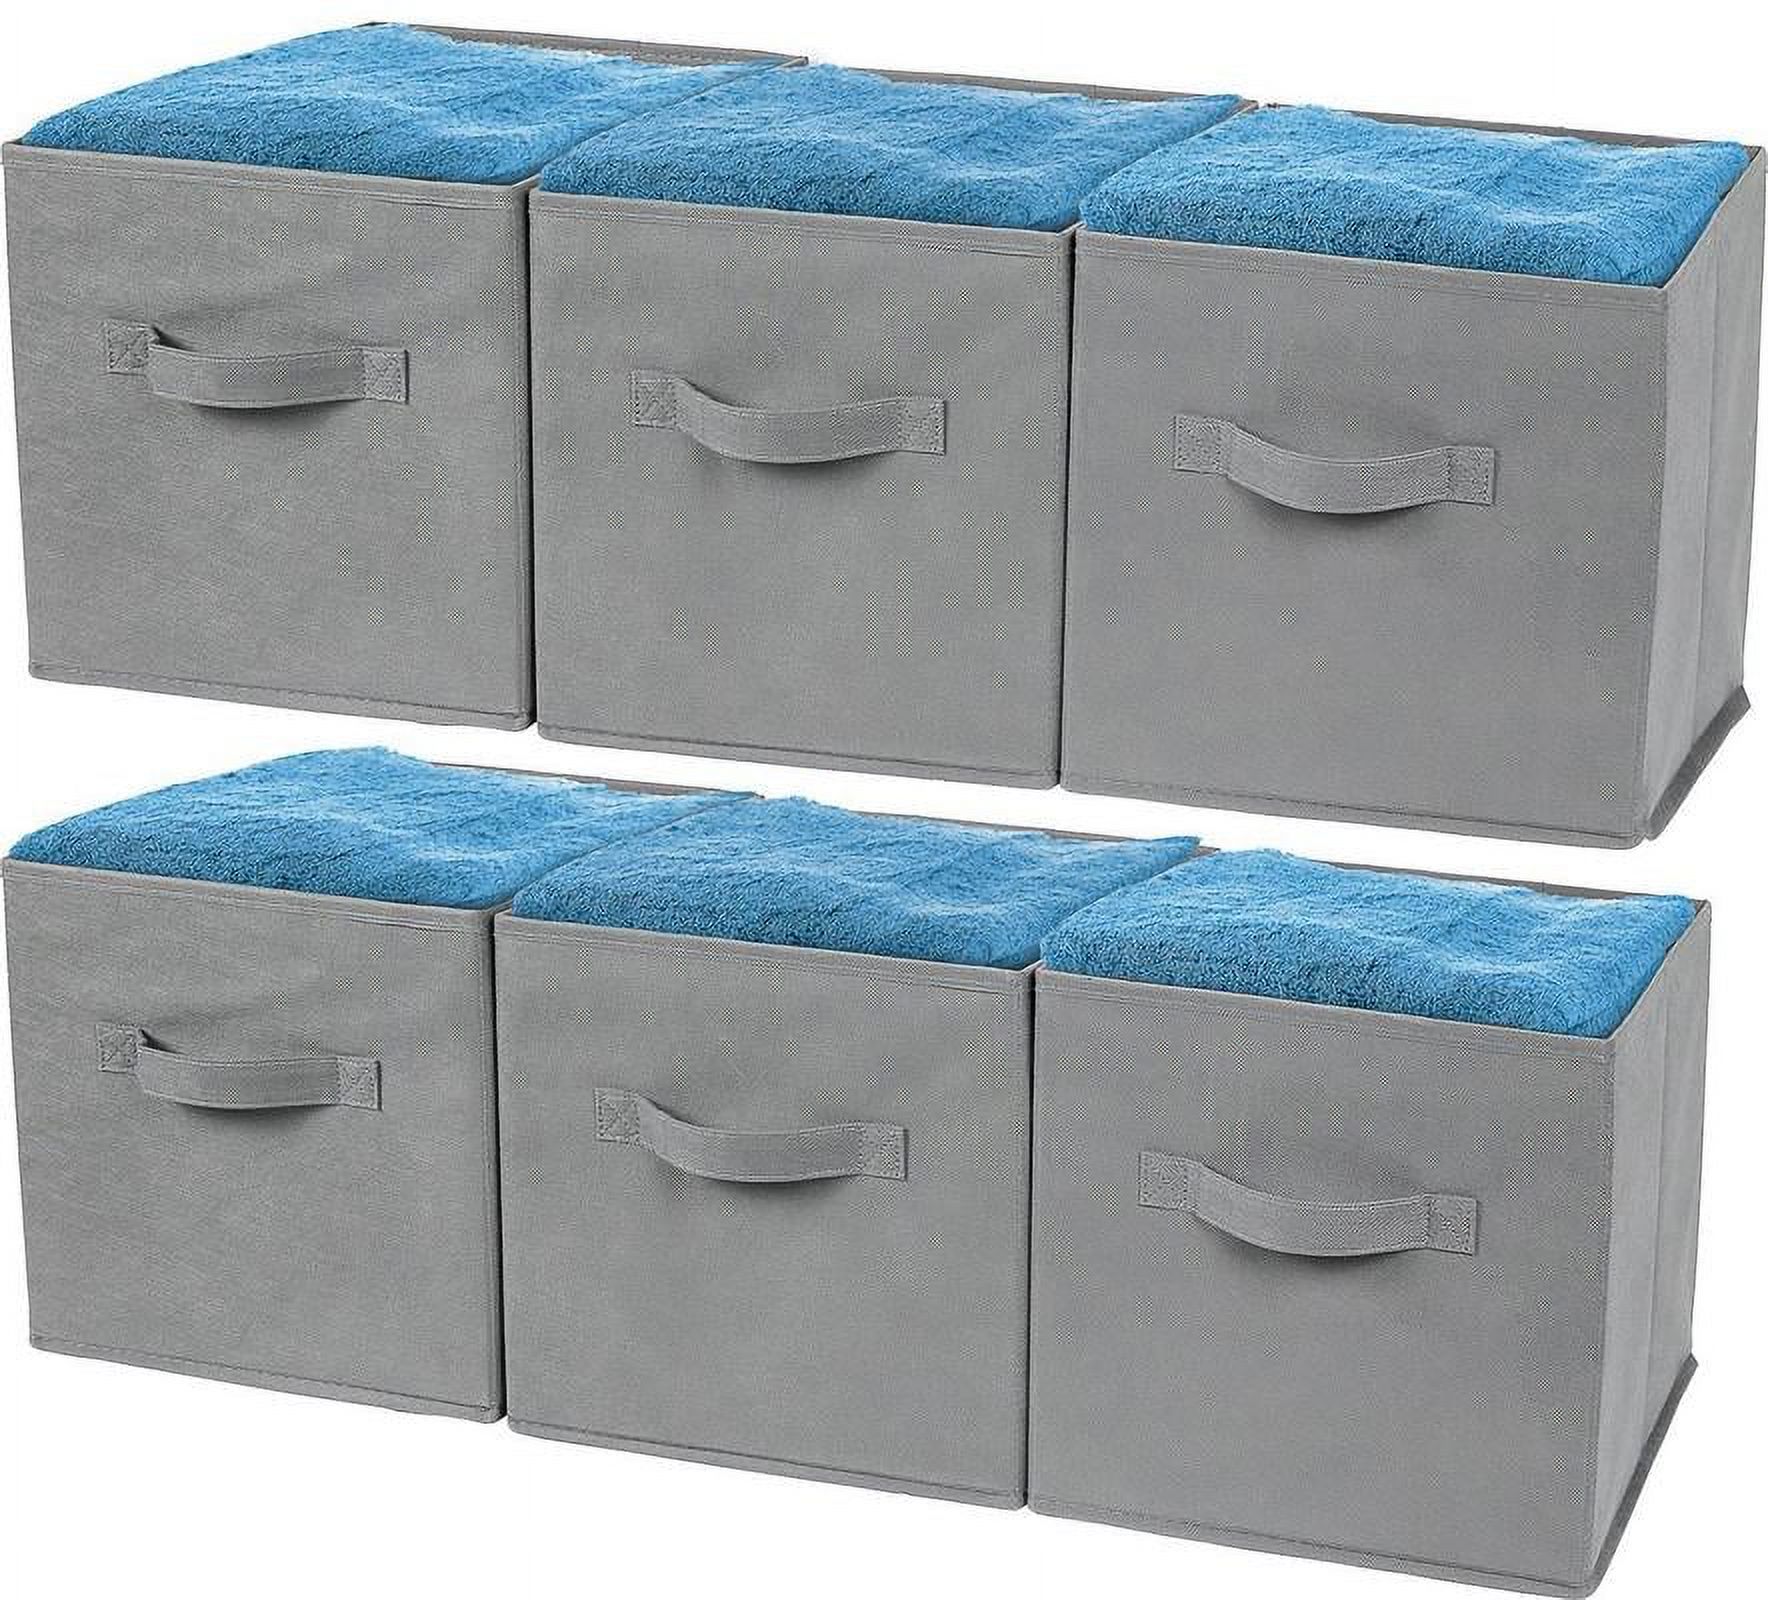 Greenco Foldable Fabric Storage Cubes Non-Woven Fabric | Gray Cube Storage Bins | Shelf Baskets| Gray Fabric Cubes | 6 Pack - image 4 of 5